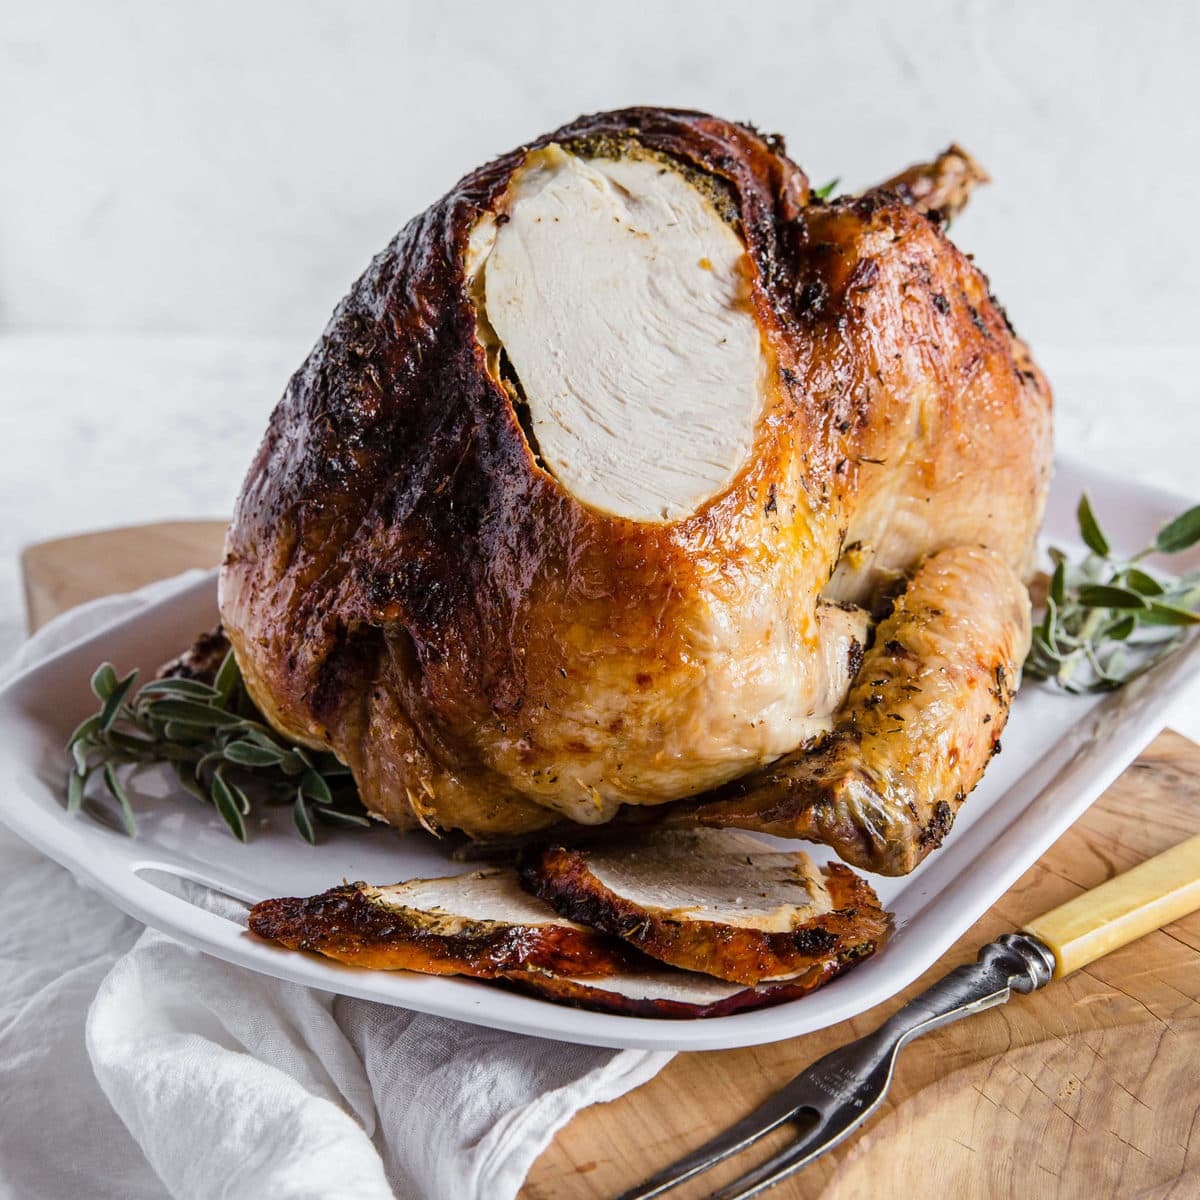 Herbed Butter Roasted Turkey - The perfect Keto Thanksgiving Recipes